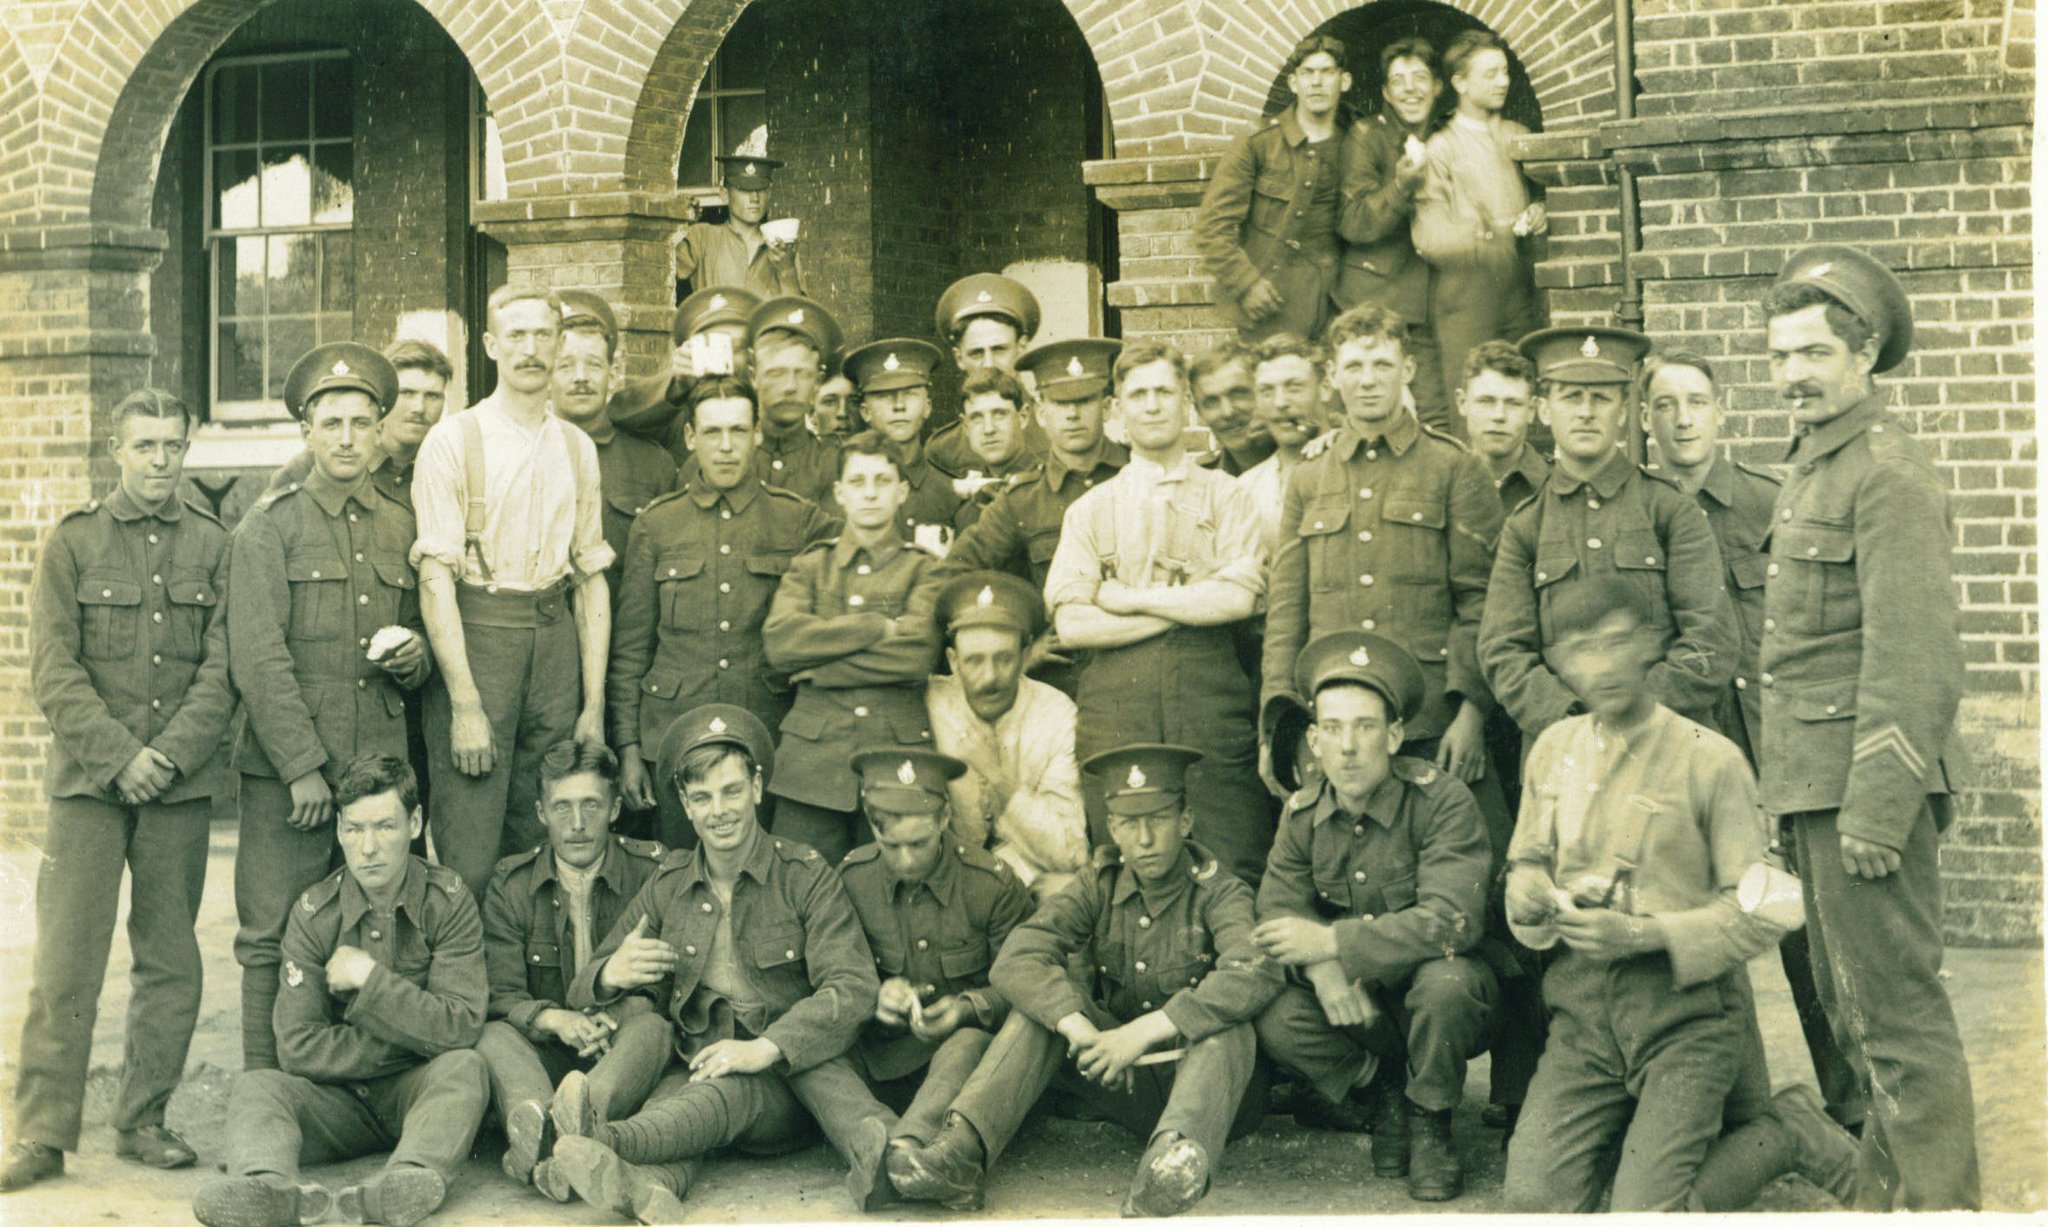 Britain went to war #OTD in 1914: these men of 2/Royal Sussex Regiment were mobilised at their barracks in Woking. Within a week they were in France, fighting on the Marne, the Aisne &amp; at Ypres. In a war said to be over by Christmas, how many of these faces lived to see it? https://t.co/dDDTPw0eYP